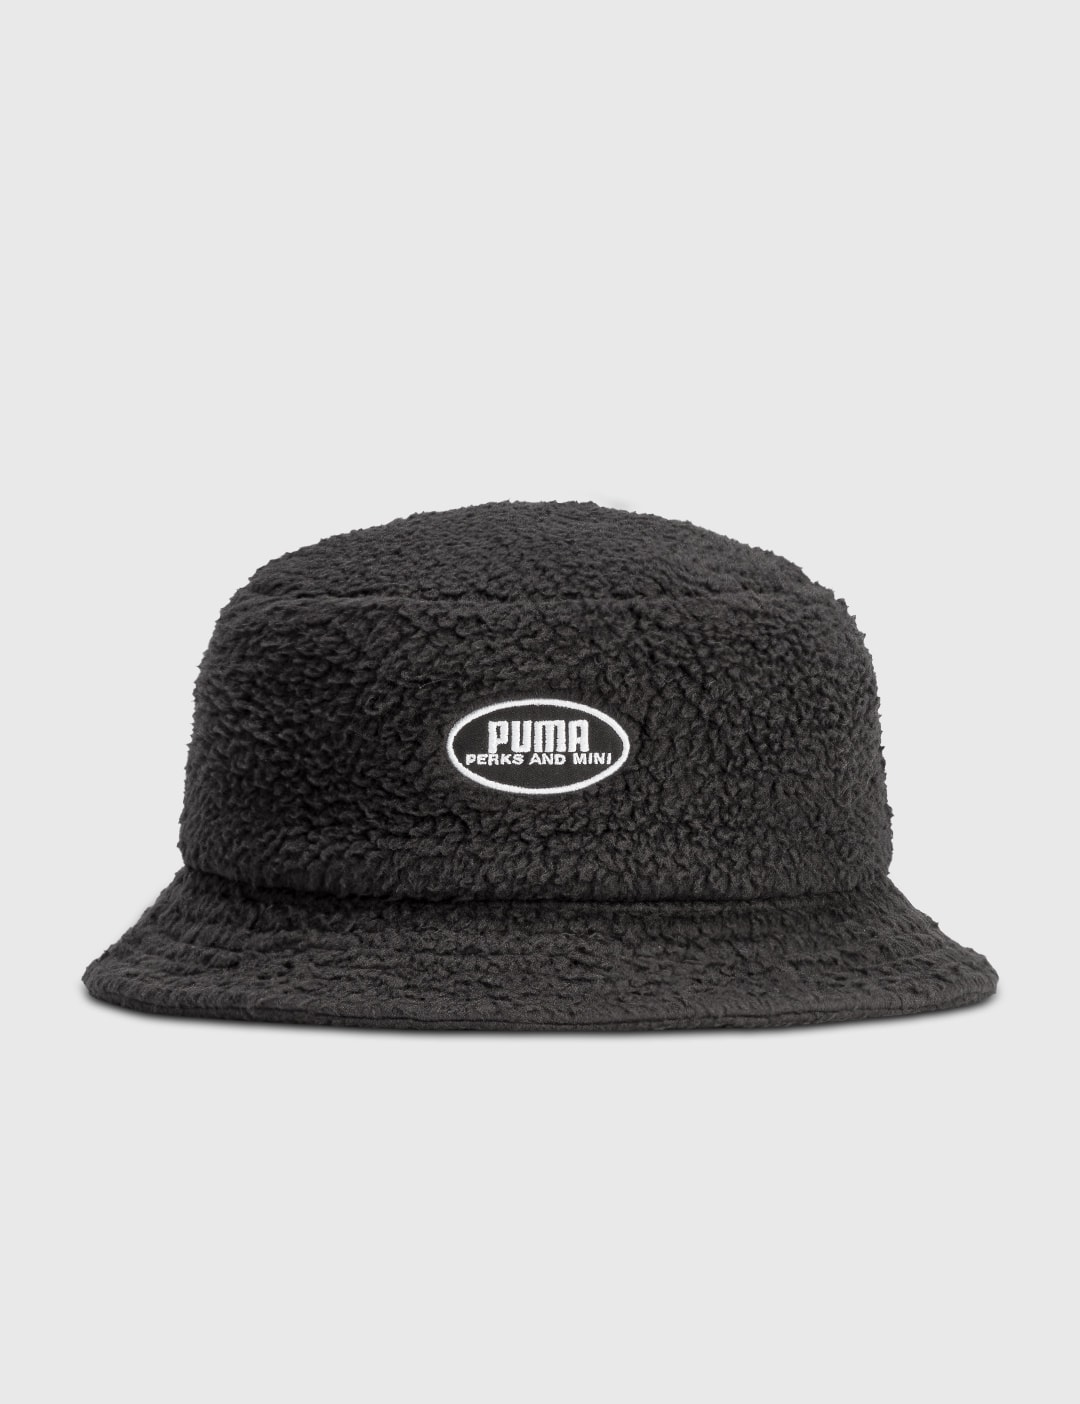 Puma x P.A.M Sherpa Bucket Hat Placeholder Image